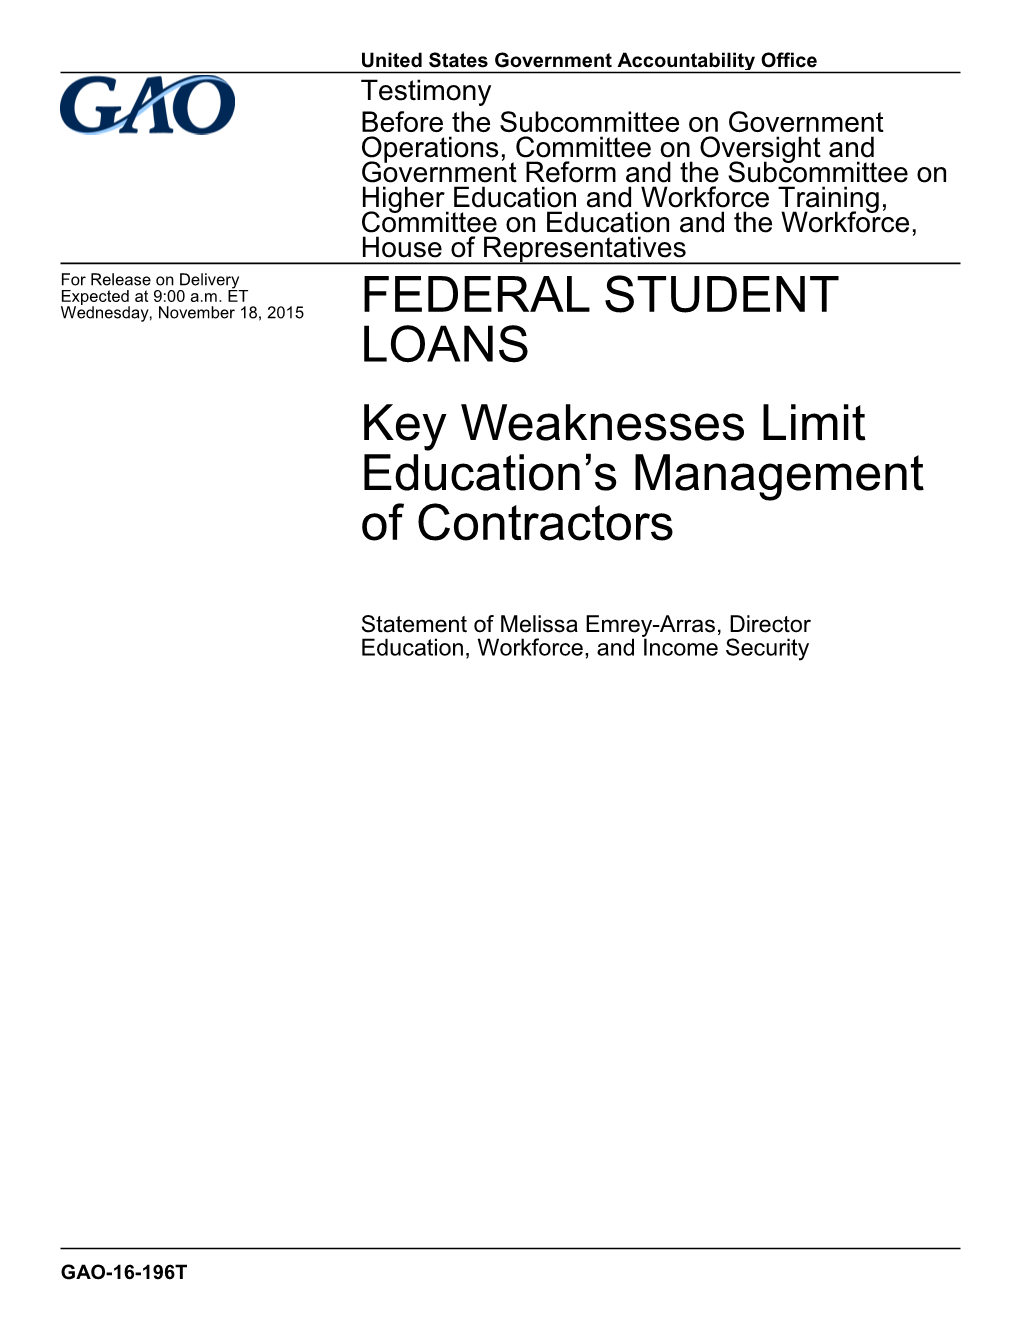 GAO-16-196T, Federal Student Loans: Key Weaknesses Limit Education's Management of Contractors